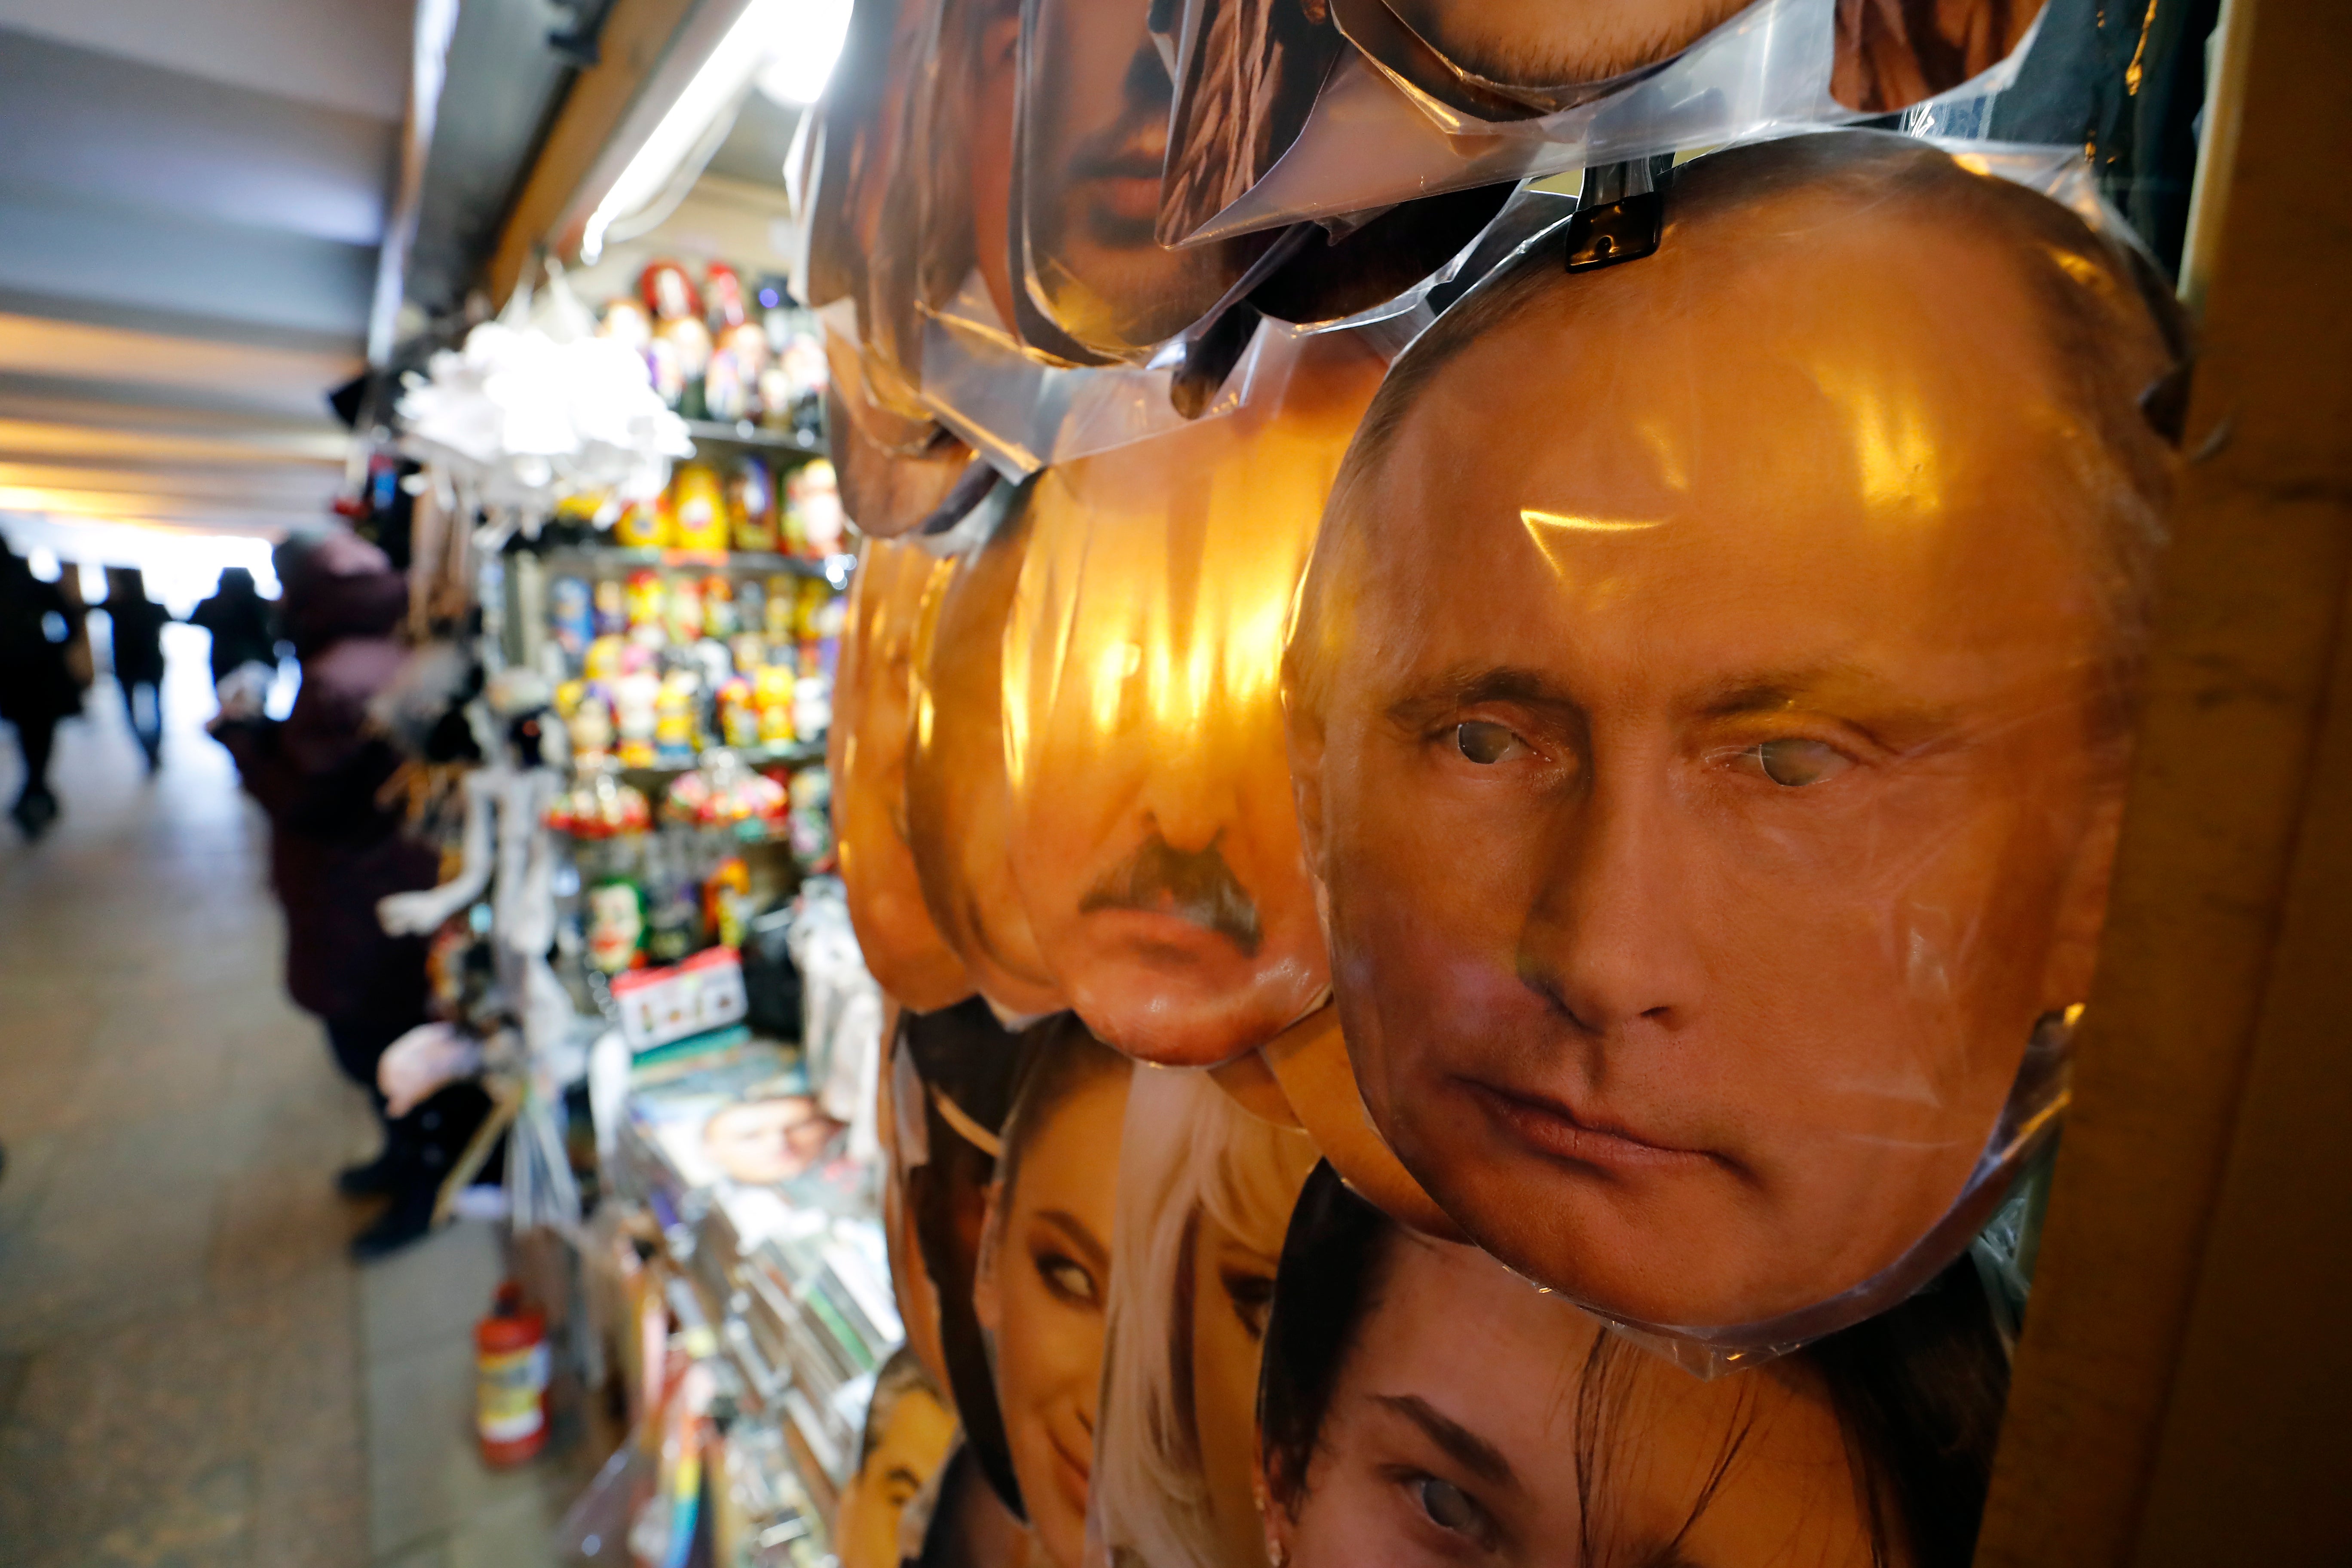 Masks with portraits of Russian President Vladimir Putin (R), and Belarus President Alexander Lukashenko on display in a street market as souvenirs in St. Petersburg